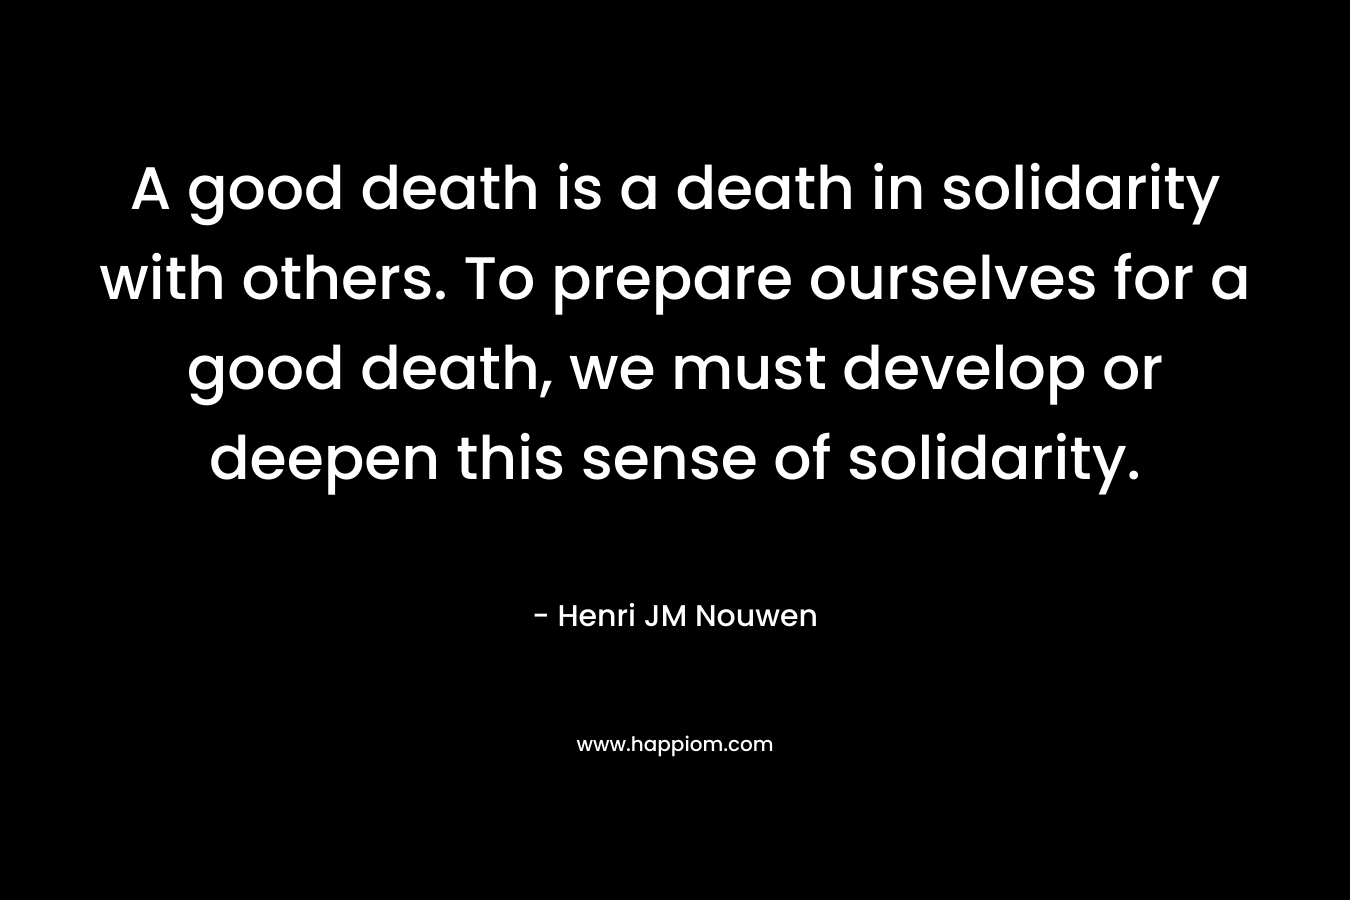 A good death is a death in solidarity with others. To prepare ourselves for a good death, we must develop or deepen this sense of solidarity. – Henri JM Nouwen